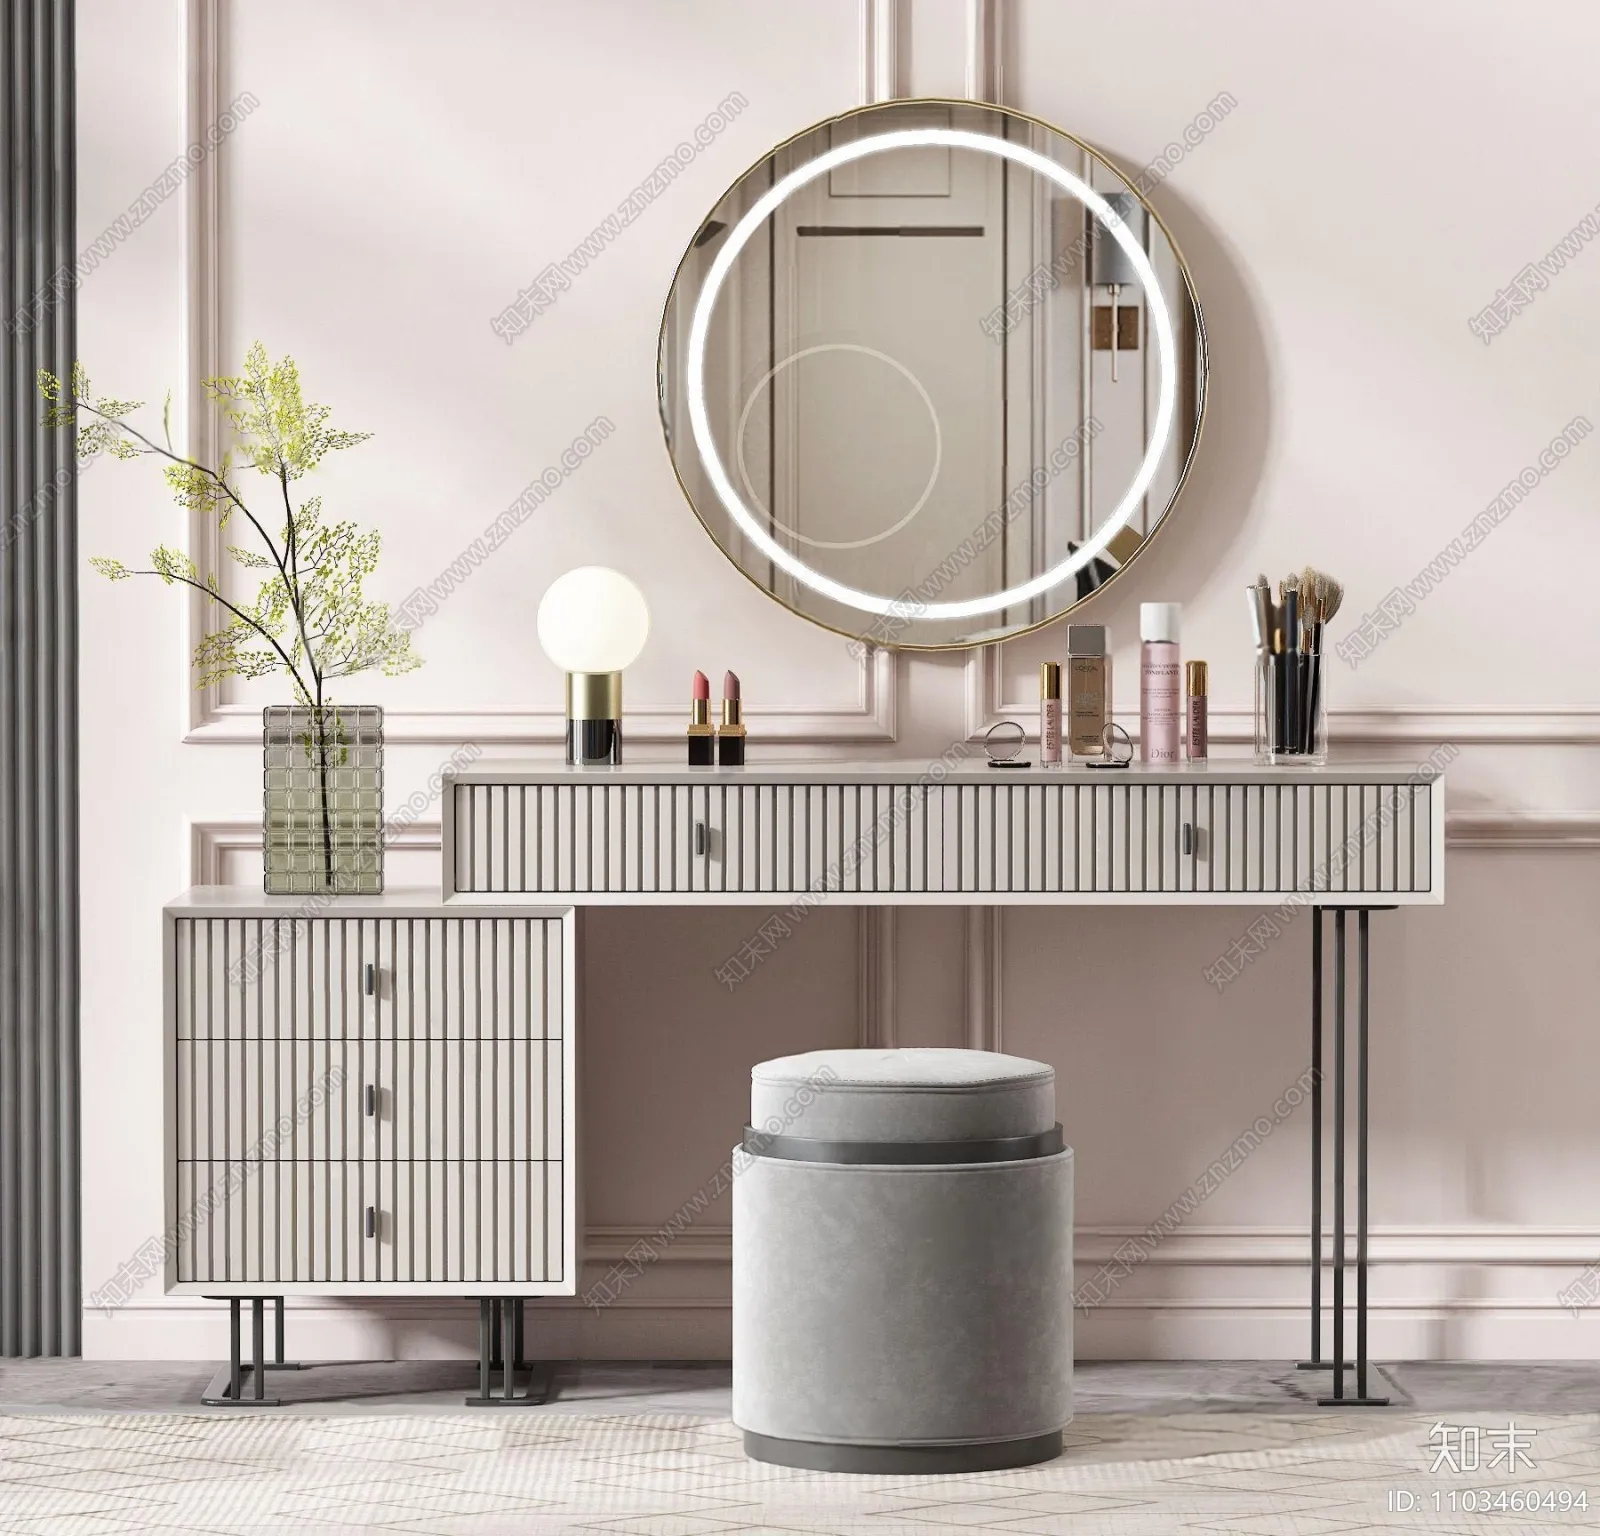 3ds Max Files – Model – 12 – Dressing Table – 14 – Dressing Table By Nguyen Ngoc Tung